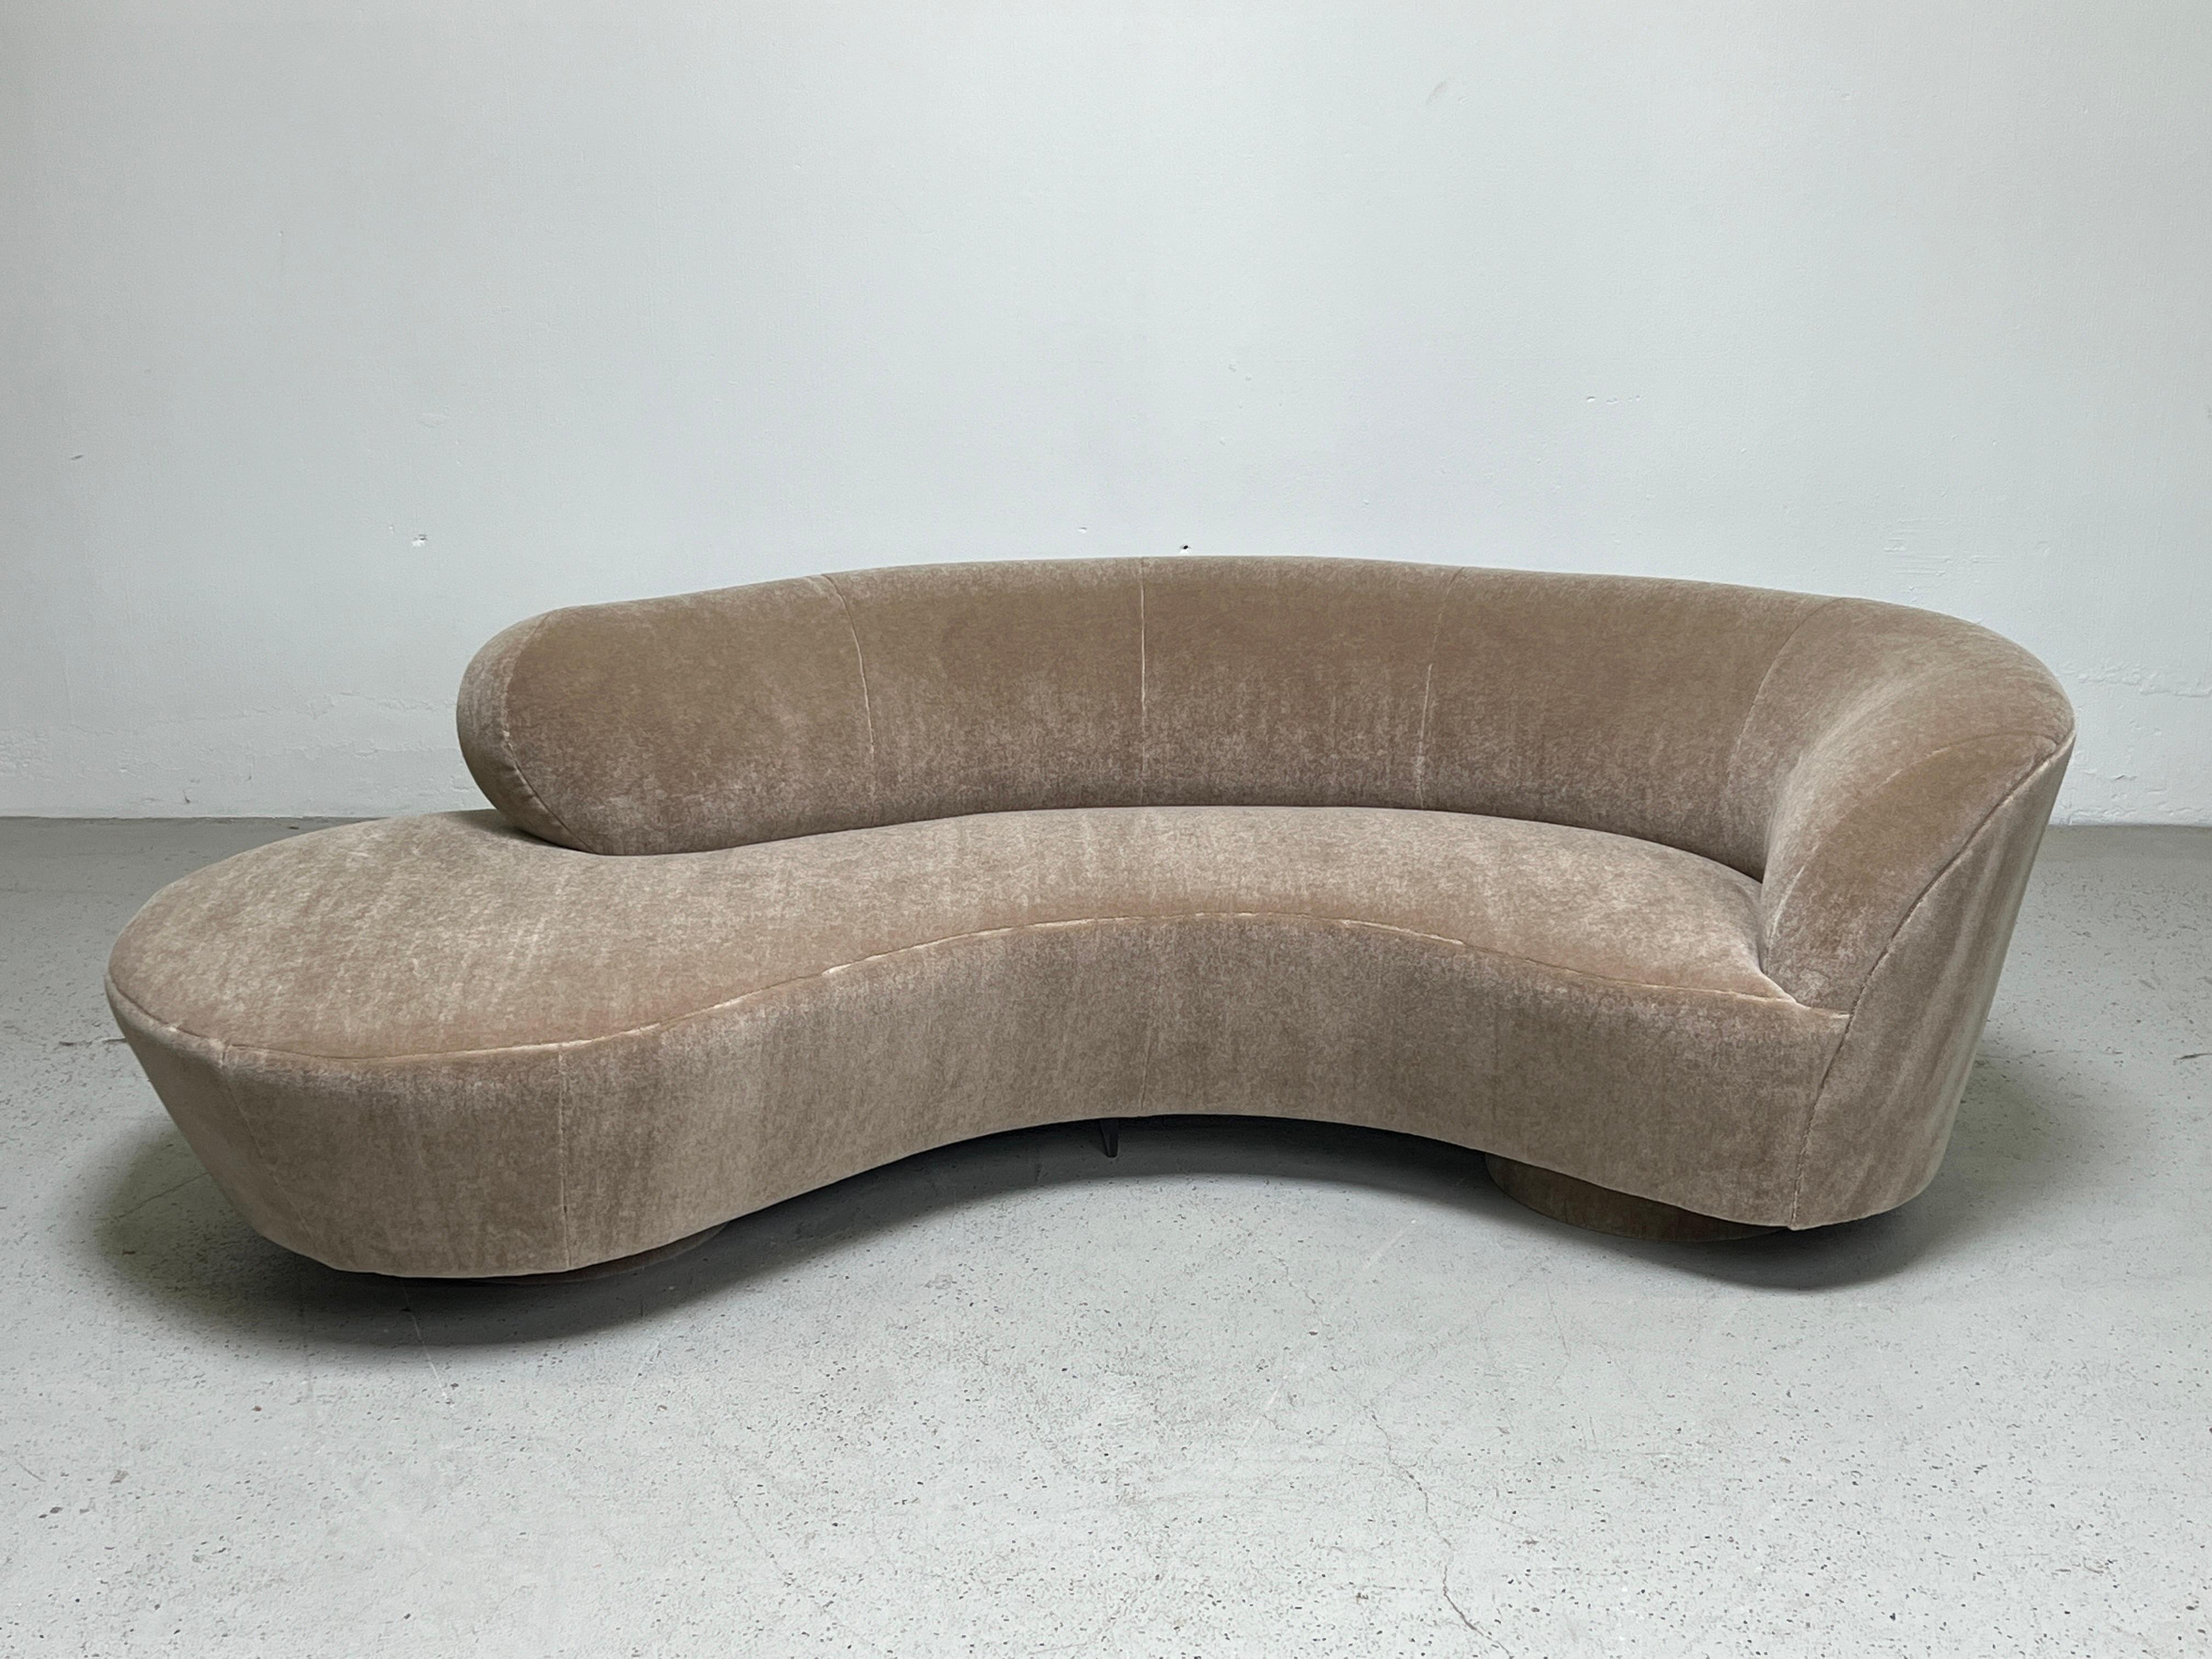 Sofa designed by Vladimir Kagan for Directional. Fully restored and upholstered in Holly Hunt / Fuzzy Wuzzy / Honey Bear plush mohair. Matching pair available. 